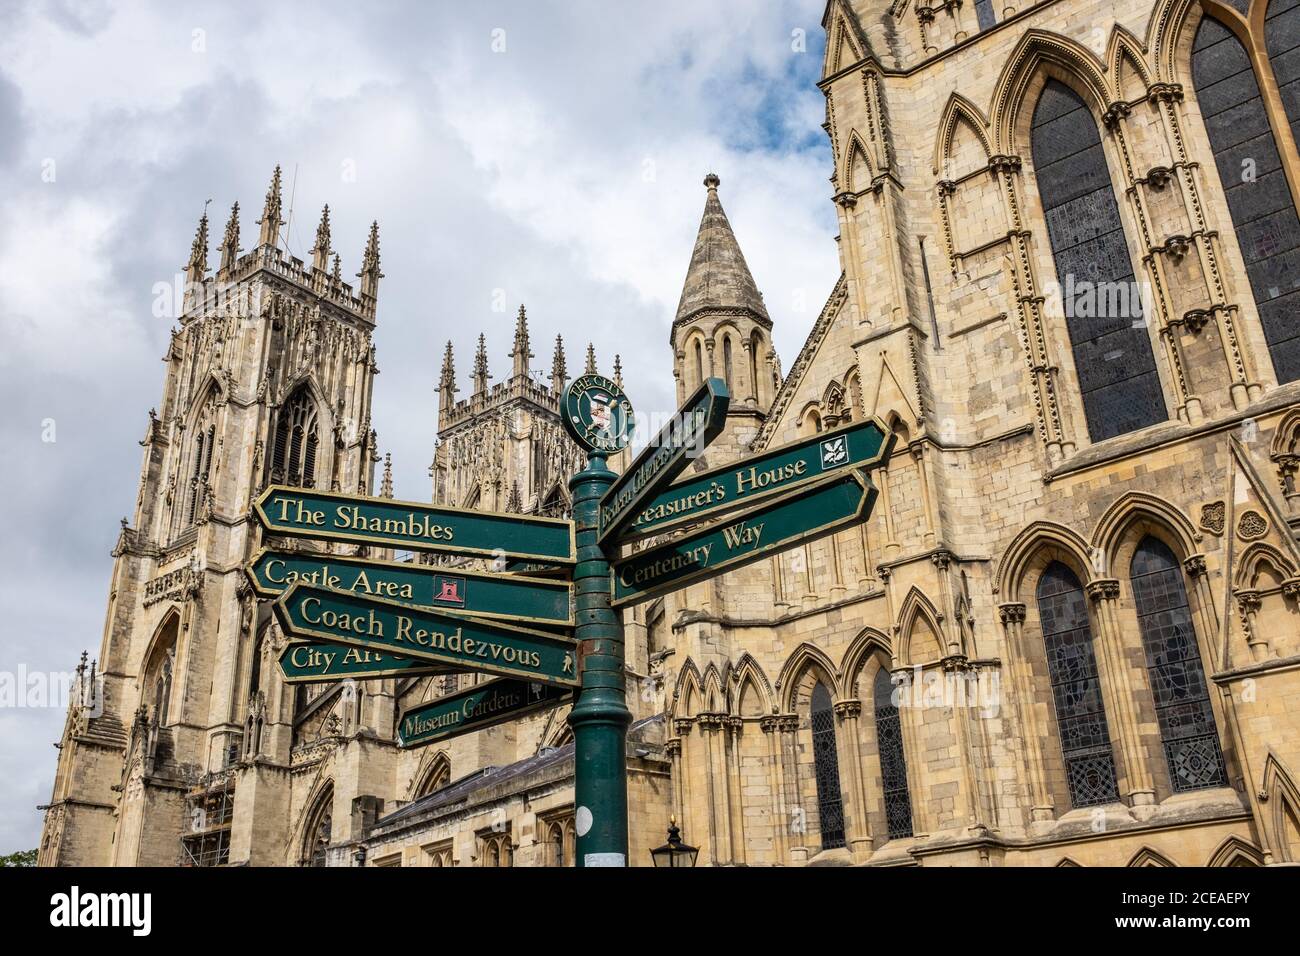 Looking up at York Minster with ornate point of interest sign in foreground on Minster Yard, York, Yorkshire UK Stock Photo